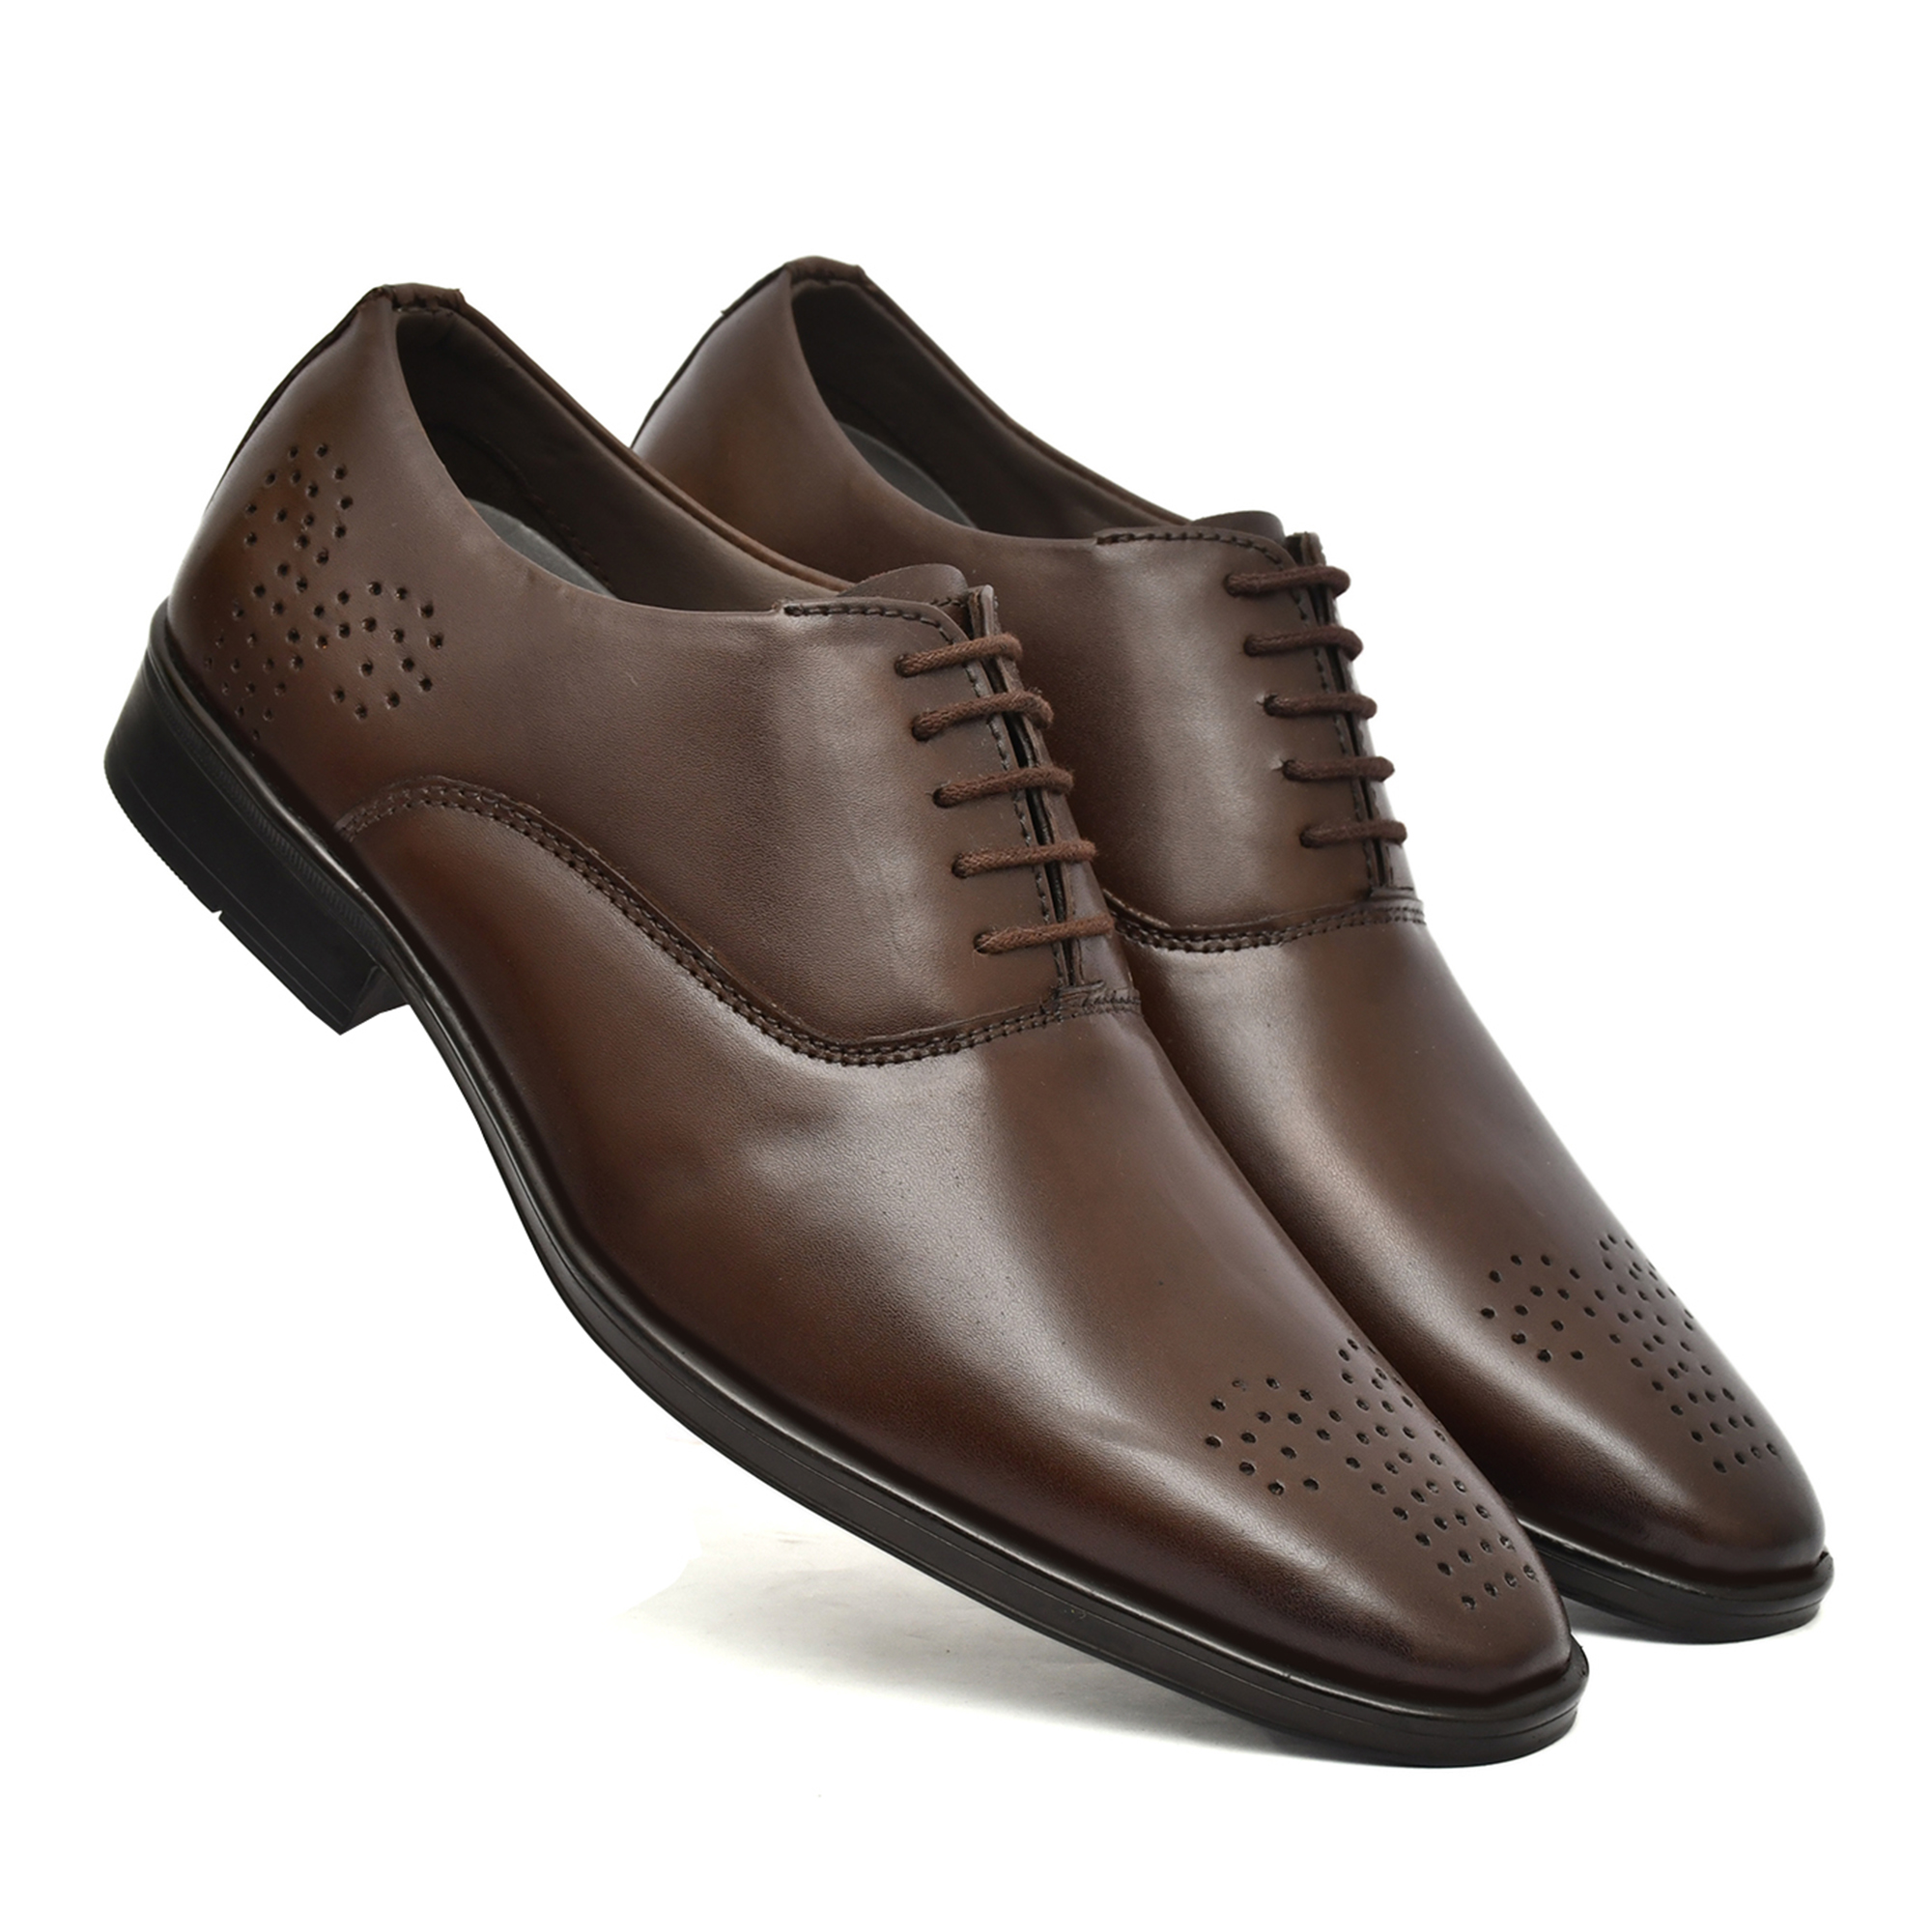 leather derby shoes for Men with Memory foam footpad by asm.